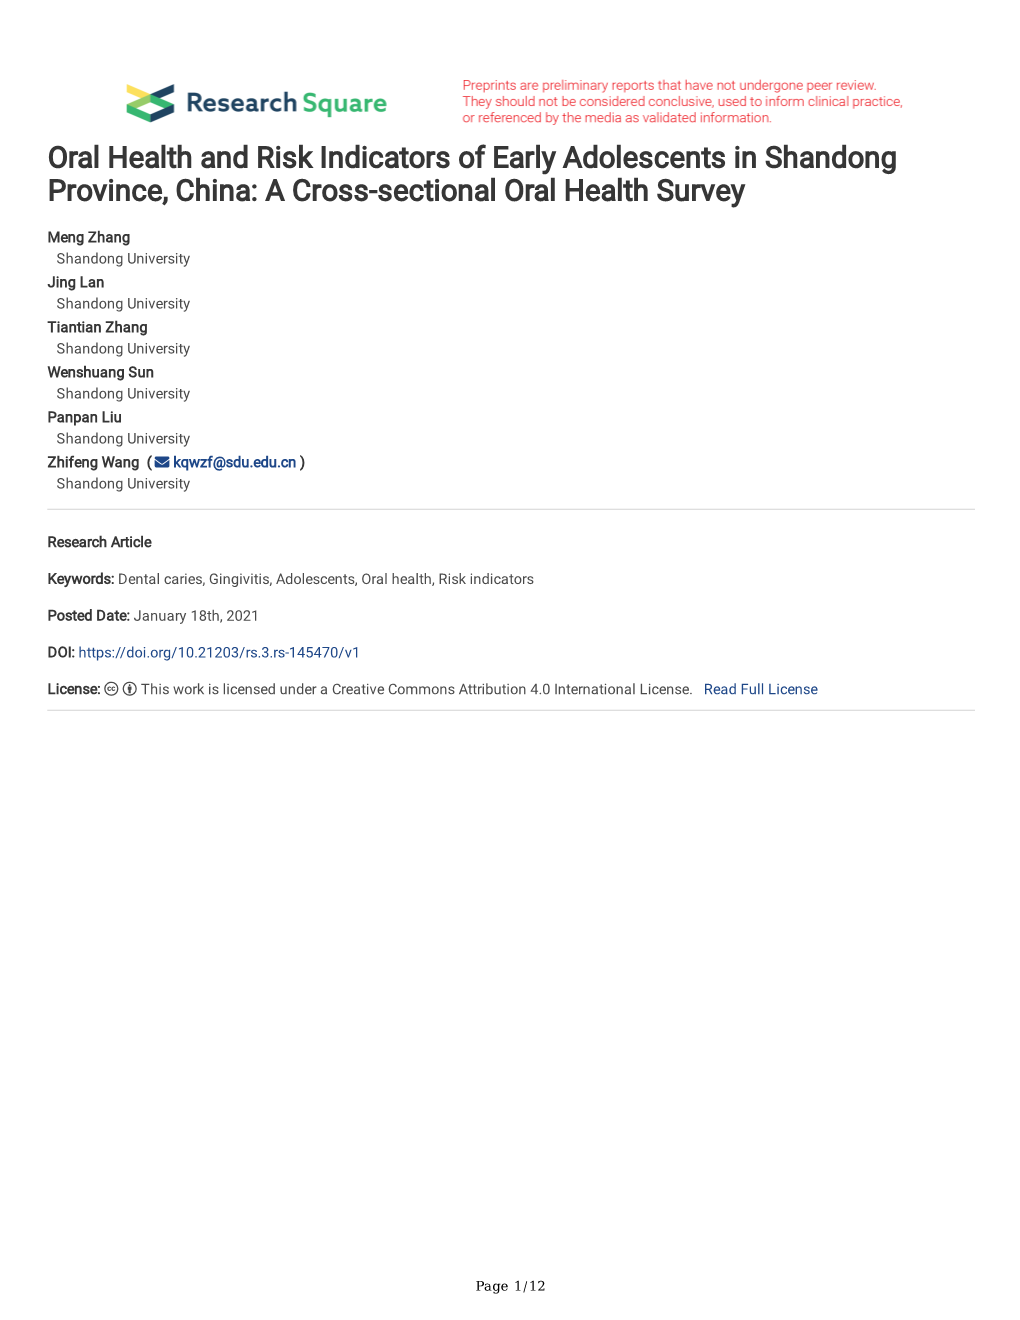 Oral Health and Risk Indicators of Early Adolescents in Shandong Province, China: a Cross-Sectional Oral Health Survey